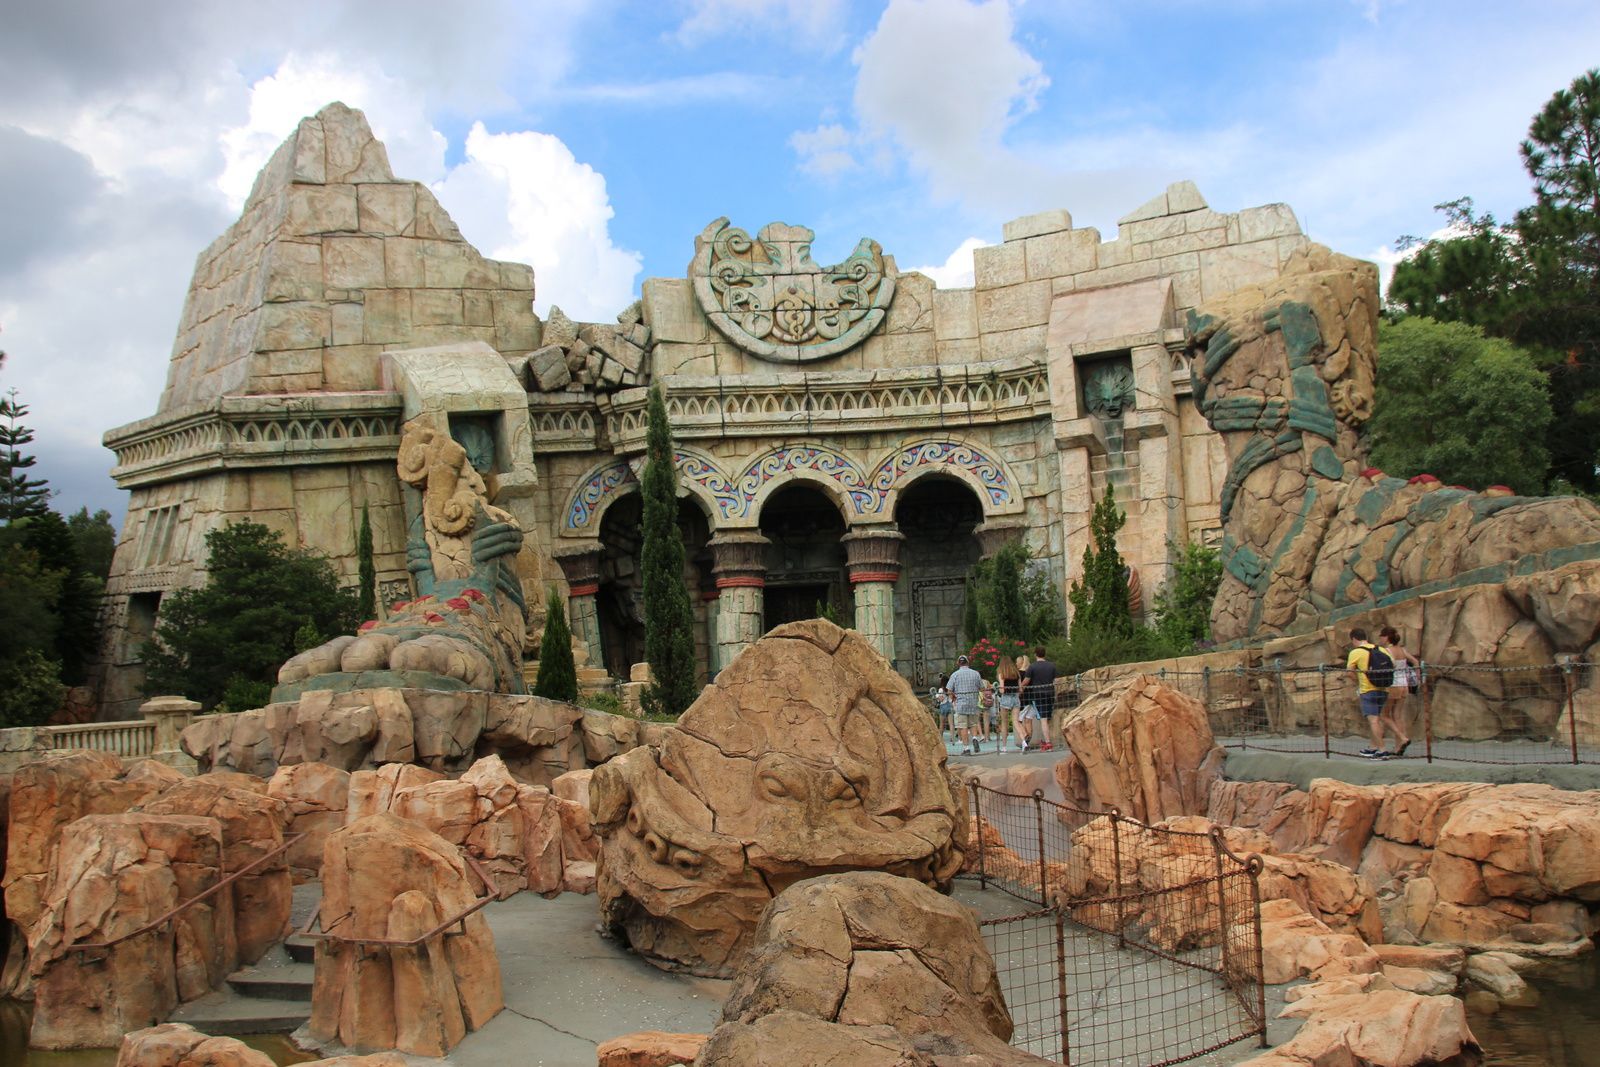 The lost continent : Universal's Islands of Adventure